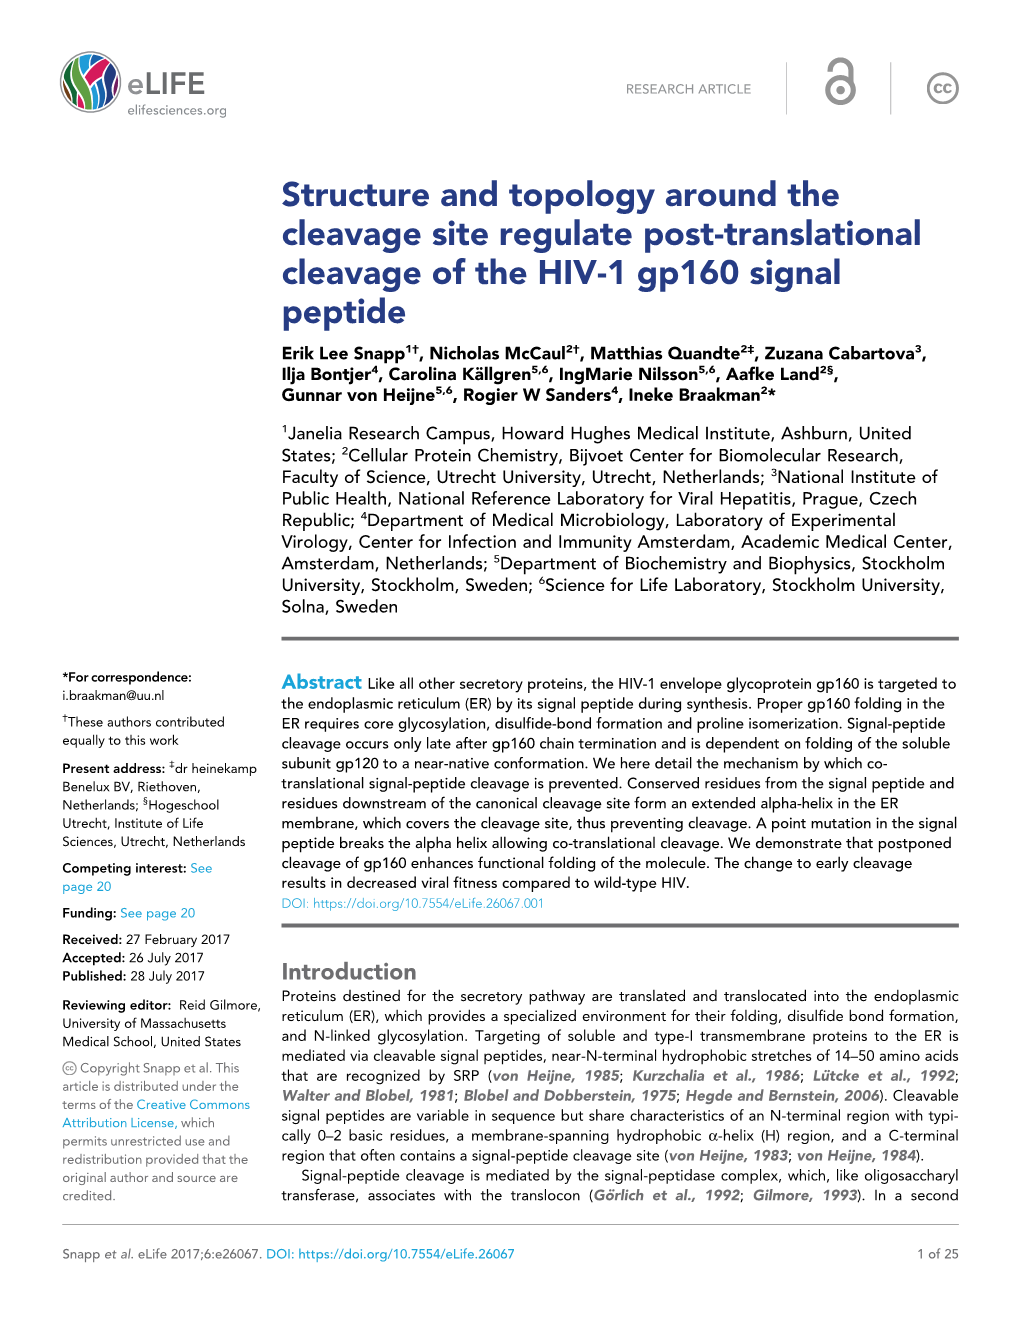 Structure and Topology Around The